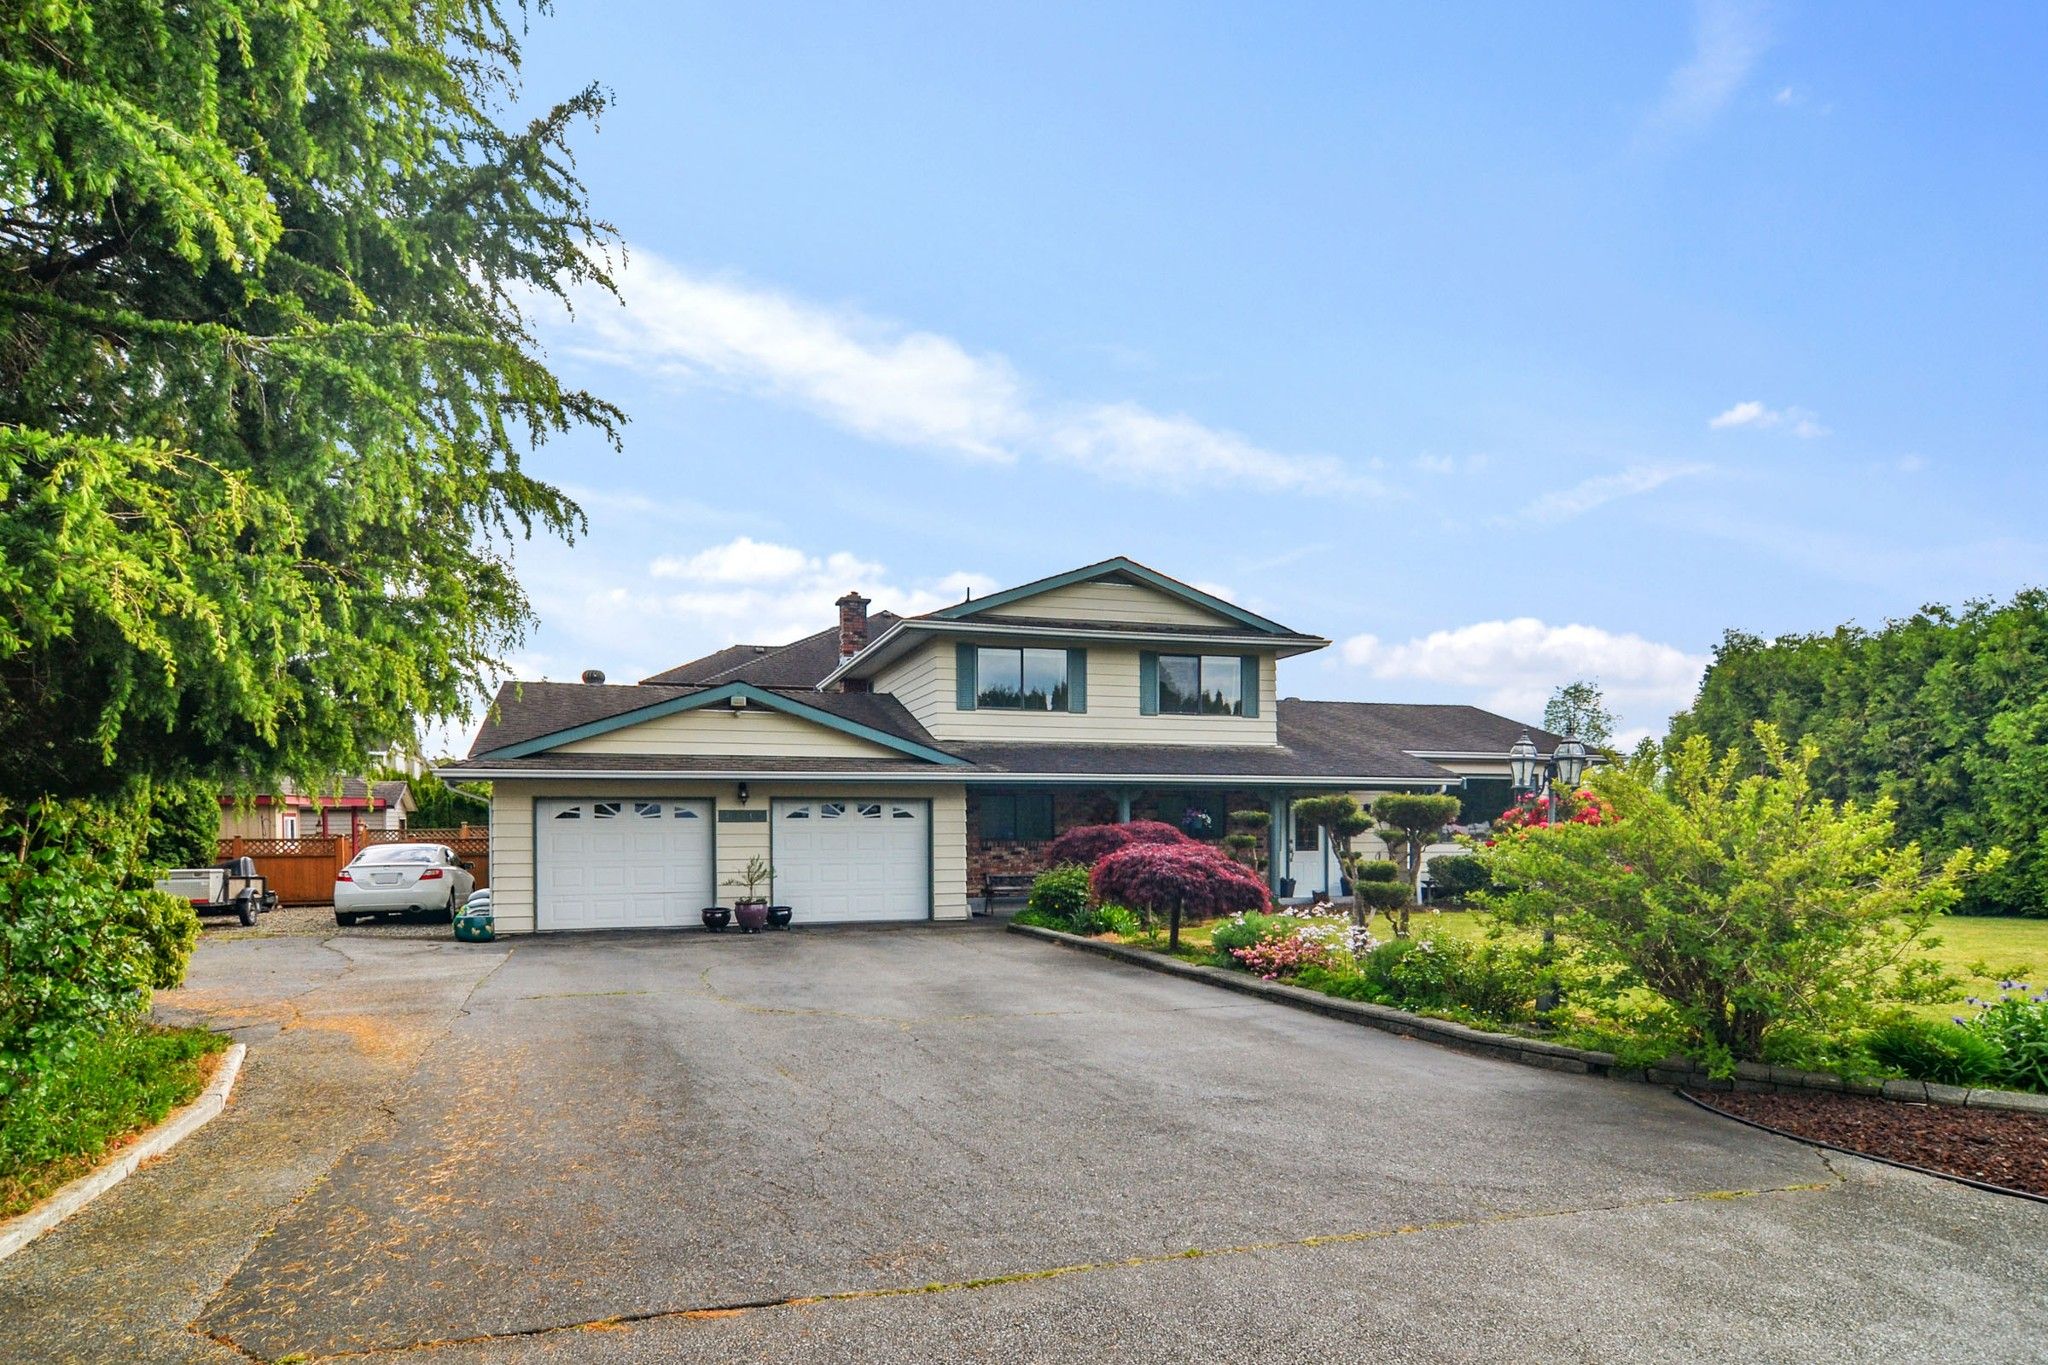 Main Photo: 26816 27 Avenue in Langley: Aldergrove Langley House for sale : MLS®# R2581115